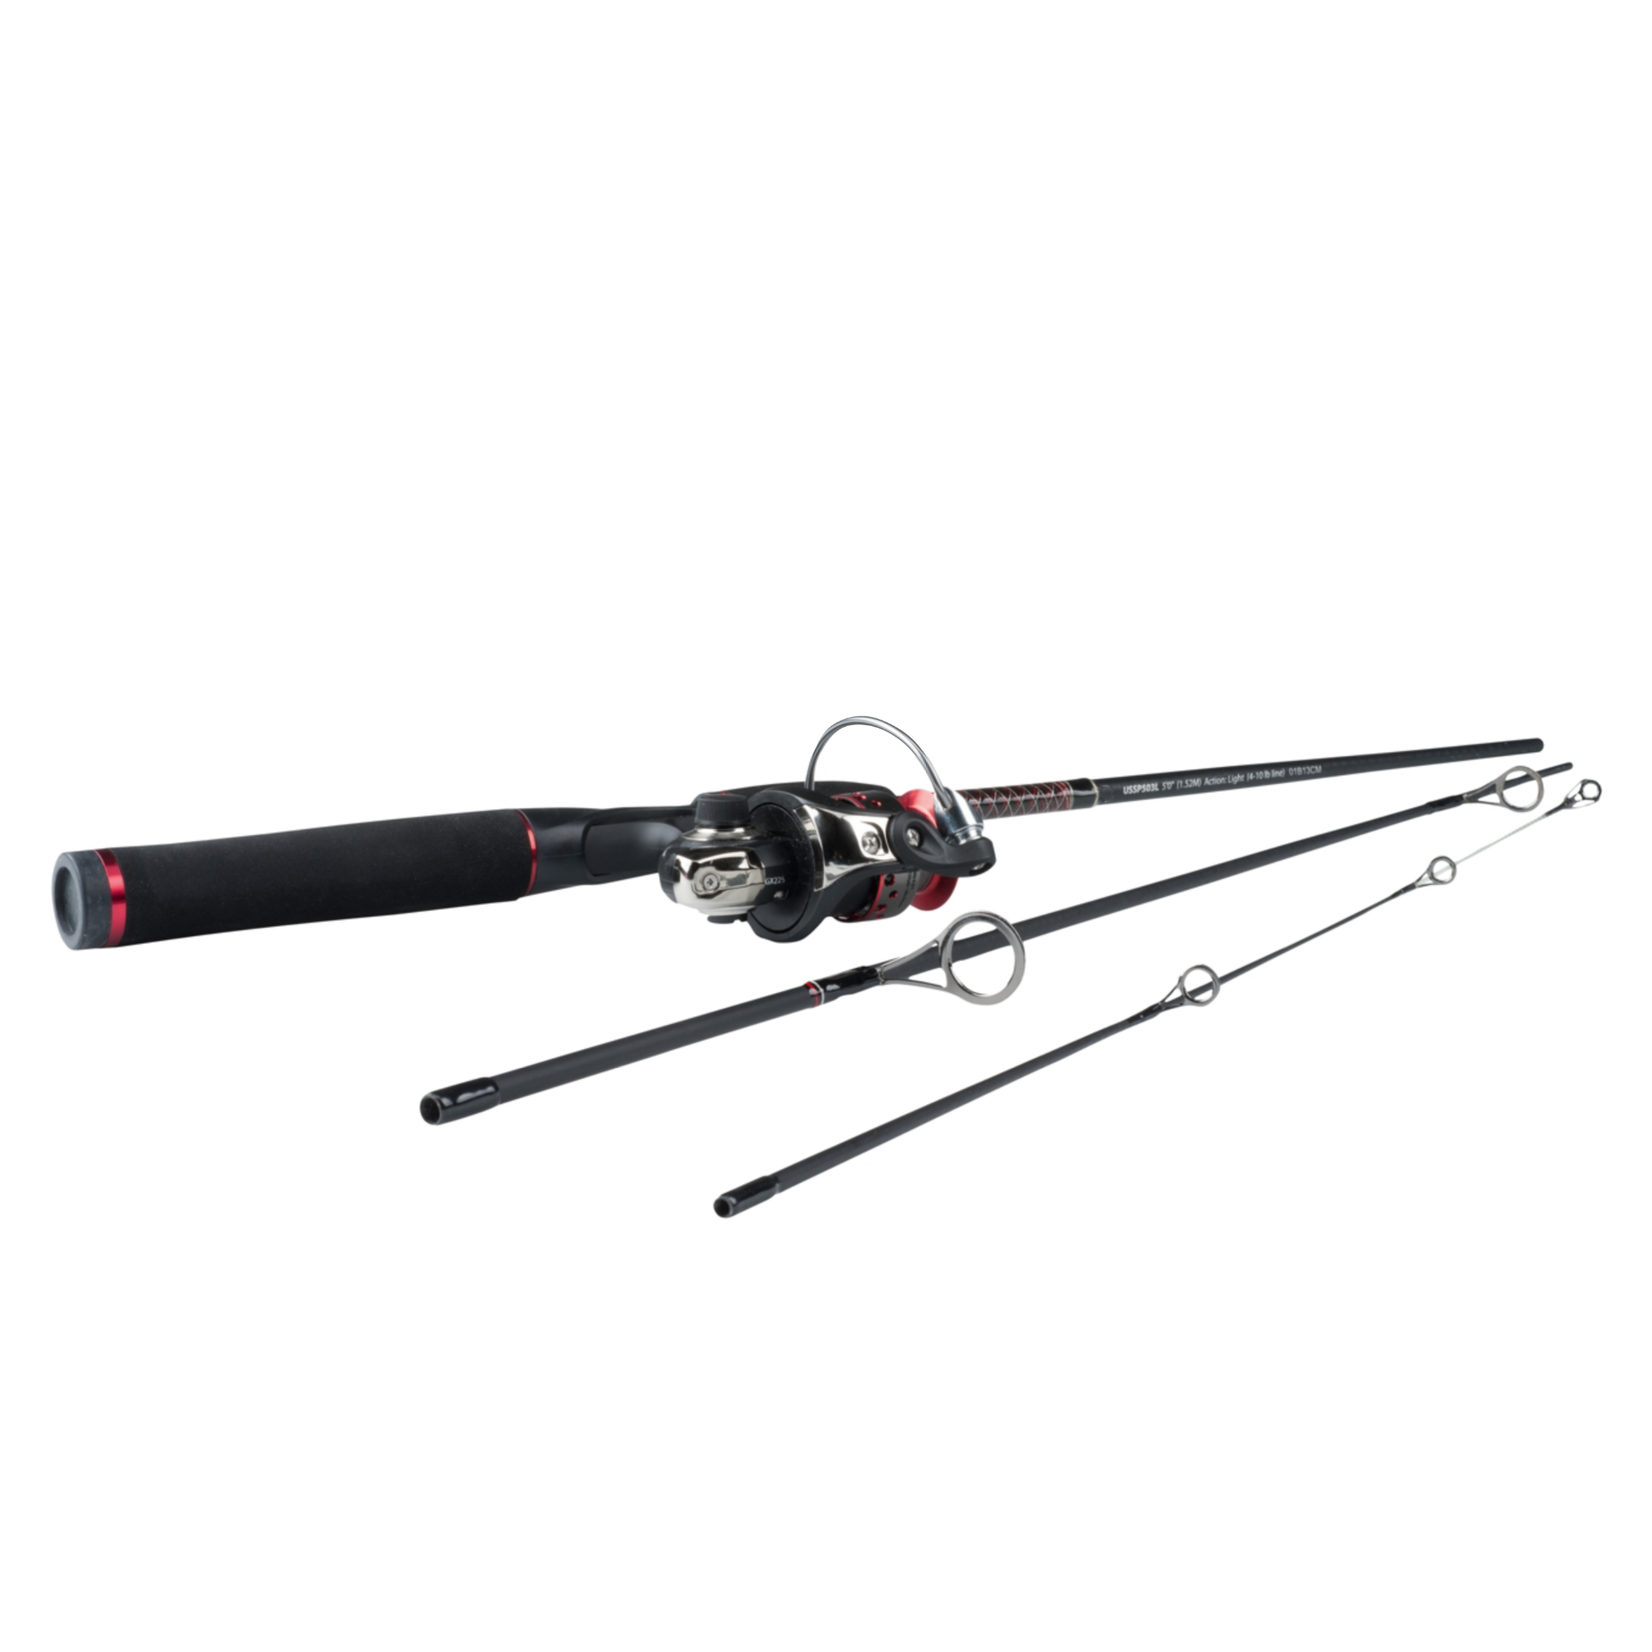 Celsius Ice Fishing Rod Stand - 2 Pack